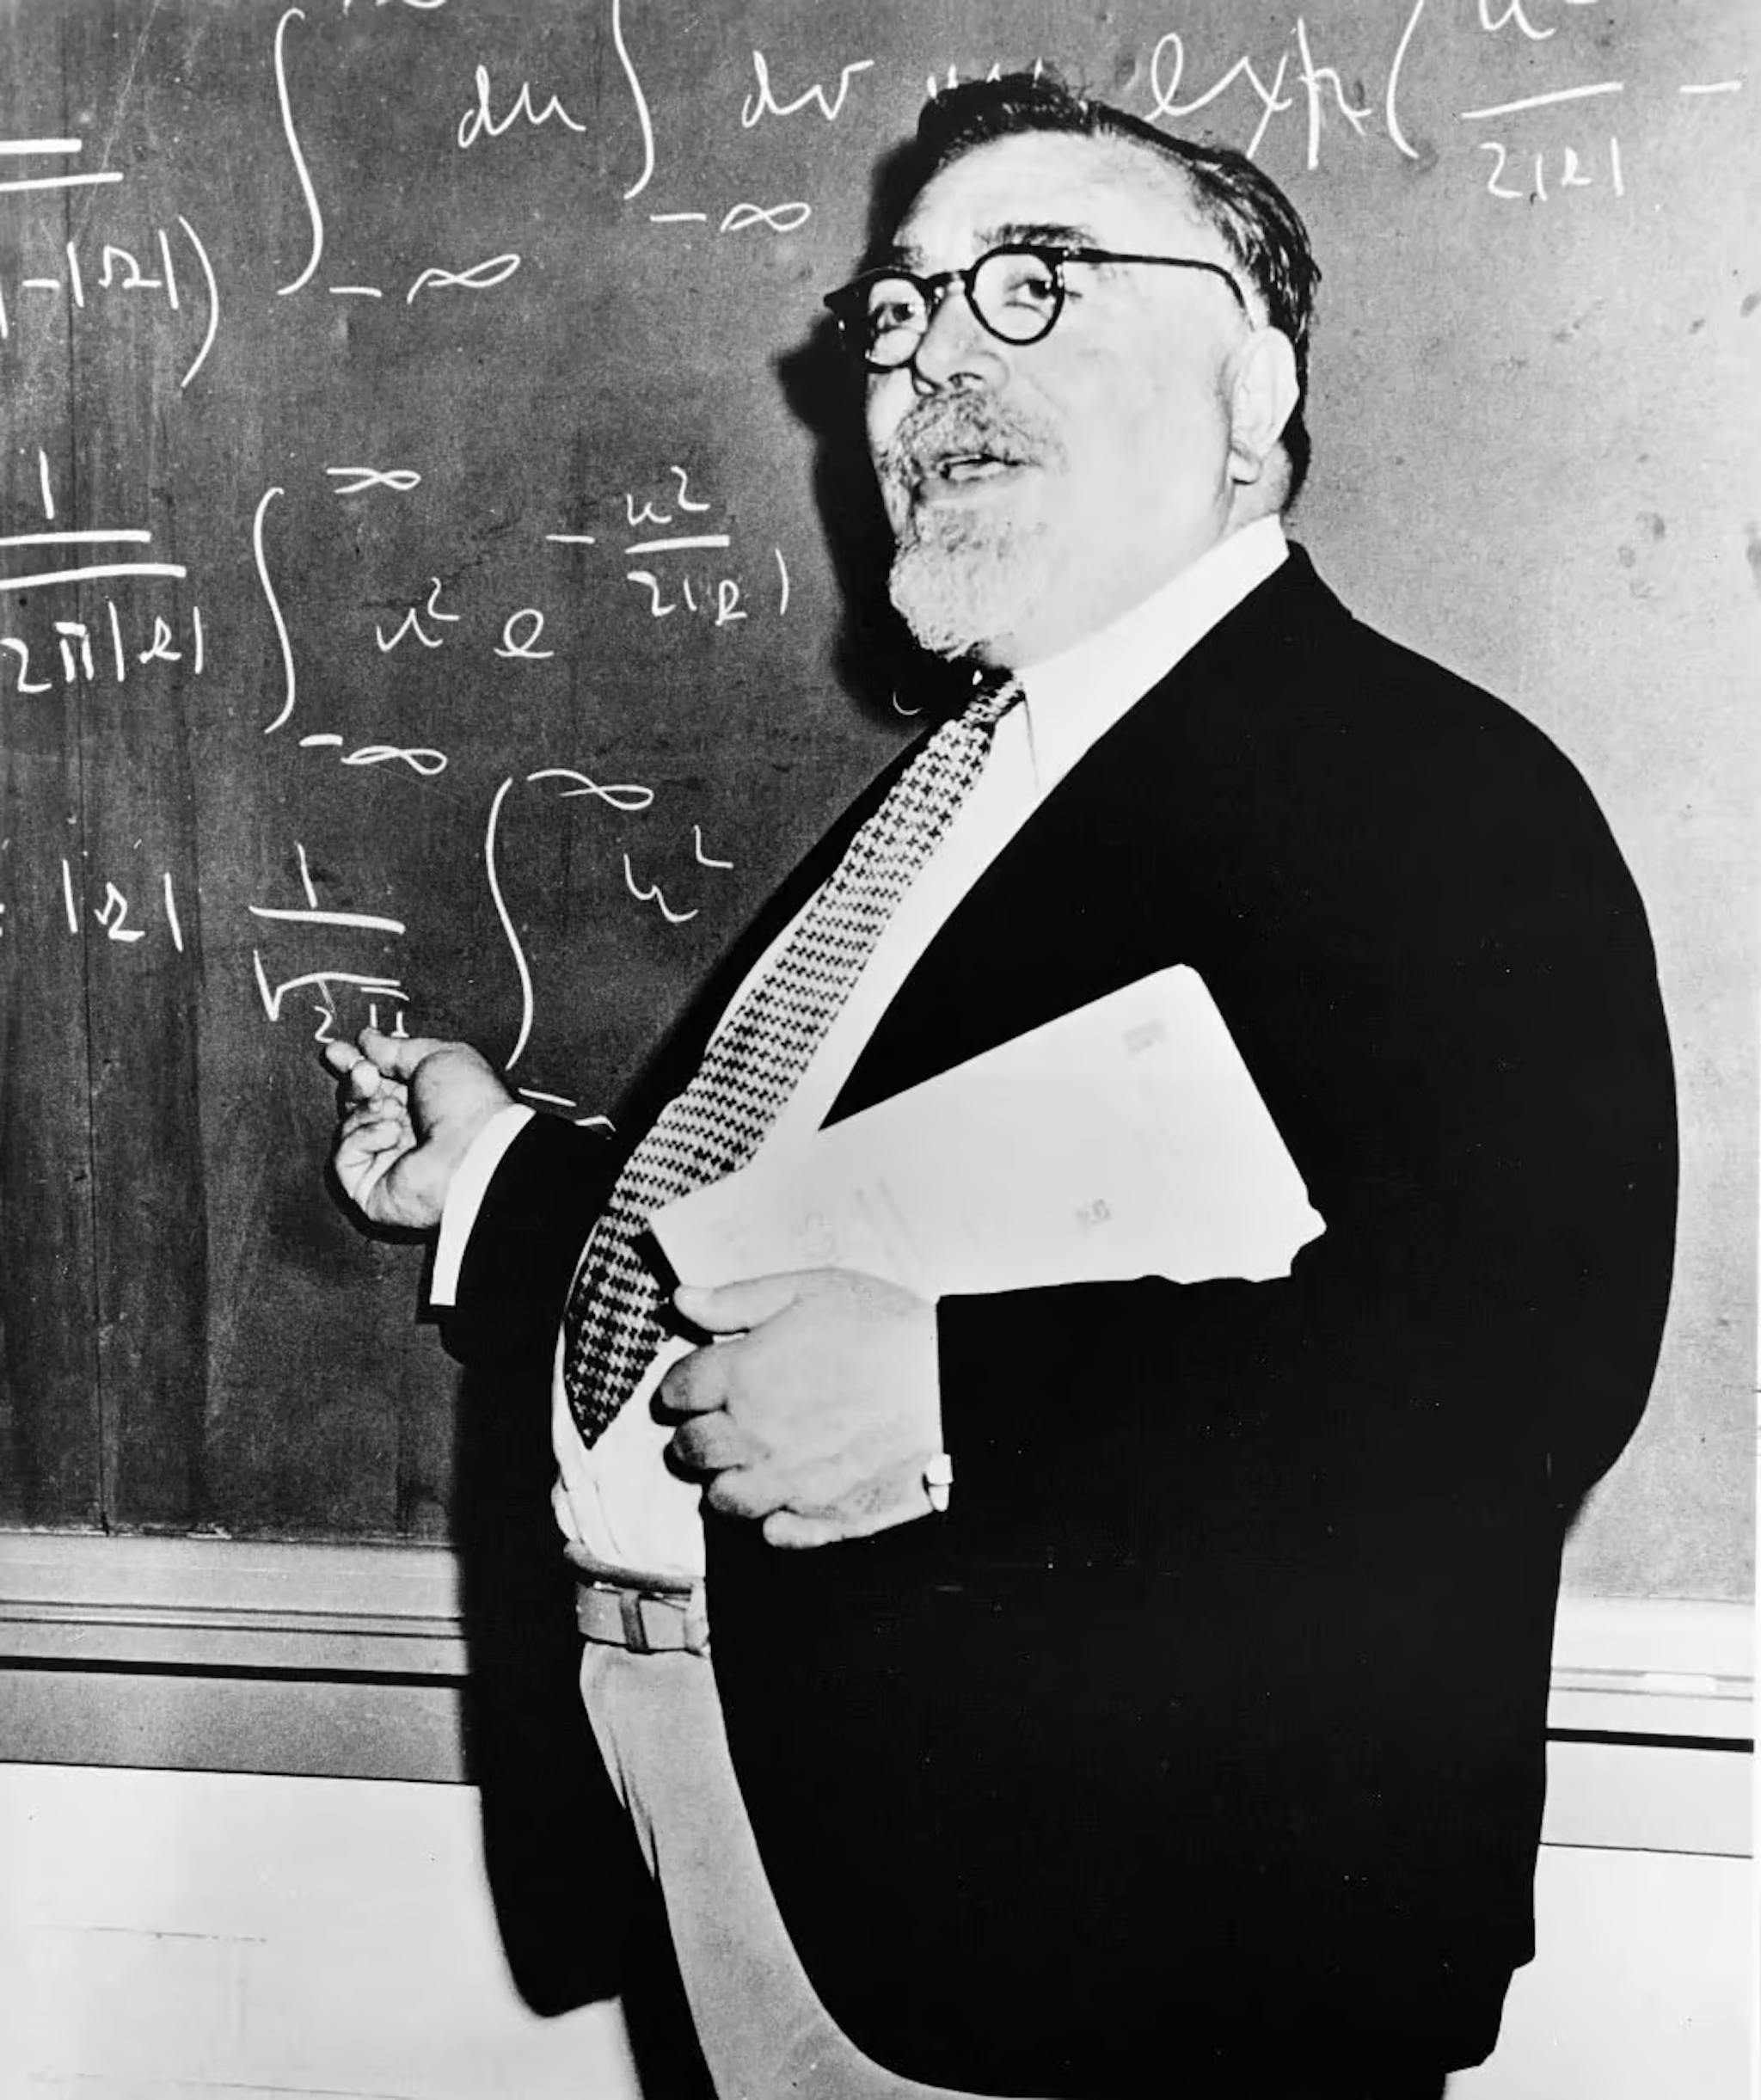 Norbert Wiener (1894-1964) made significant contributions to stochastic processes, electronic engineering, and control systems. He originated cybernetics and theorized that feedback mechanisms lead to intelligent behavior, laying the groundwork for modern AI.